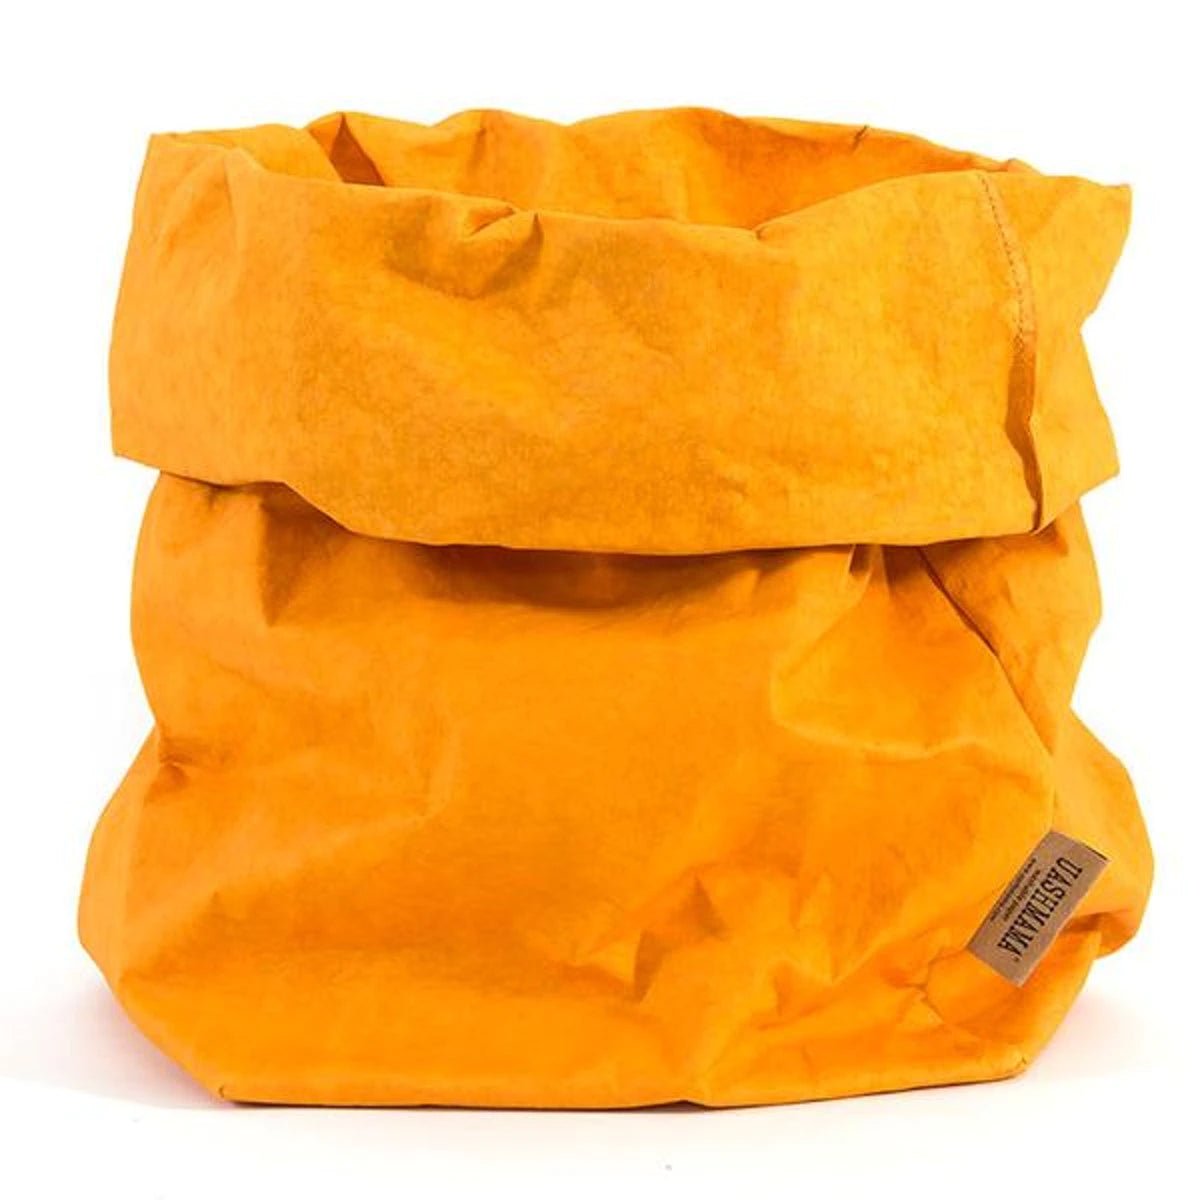 A washable paper bag is shown. The bag is rolled down at the top and features a UASHMAMA logo label on the bottom left corner. The bag pictured is the extra large size in yellow.